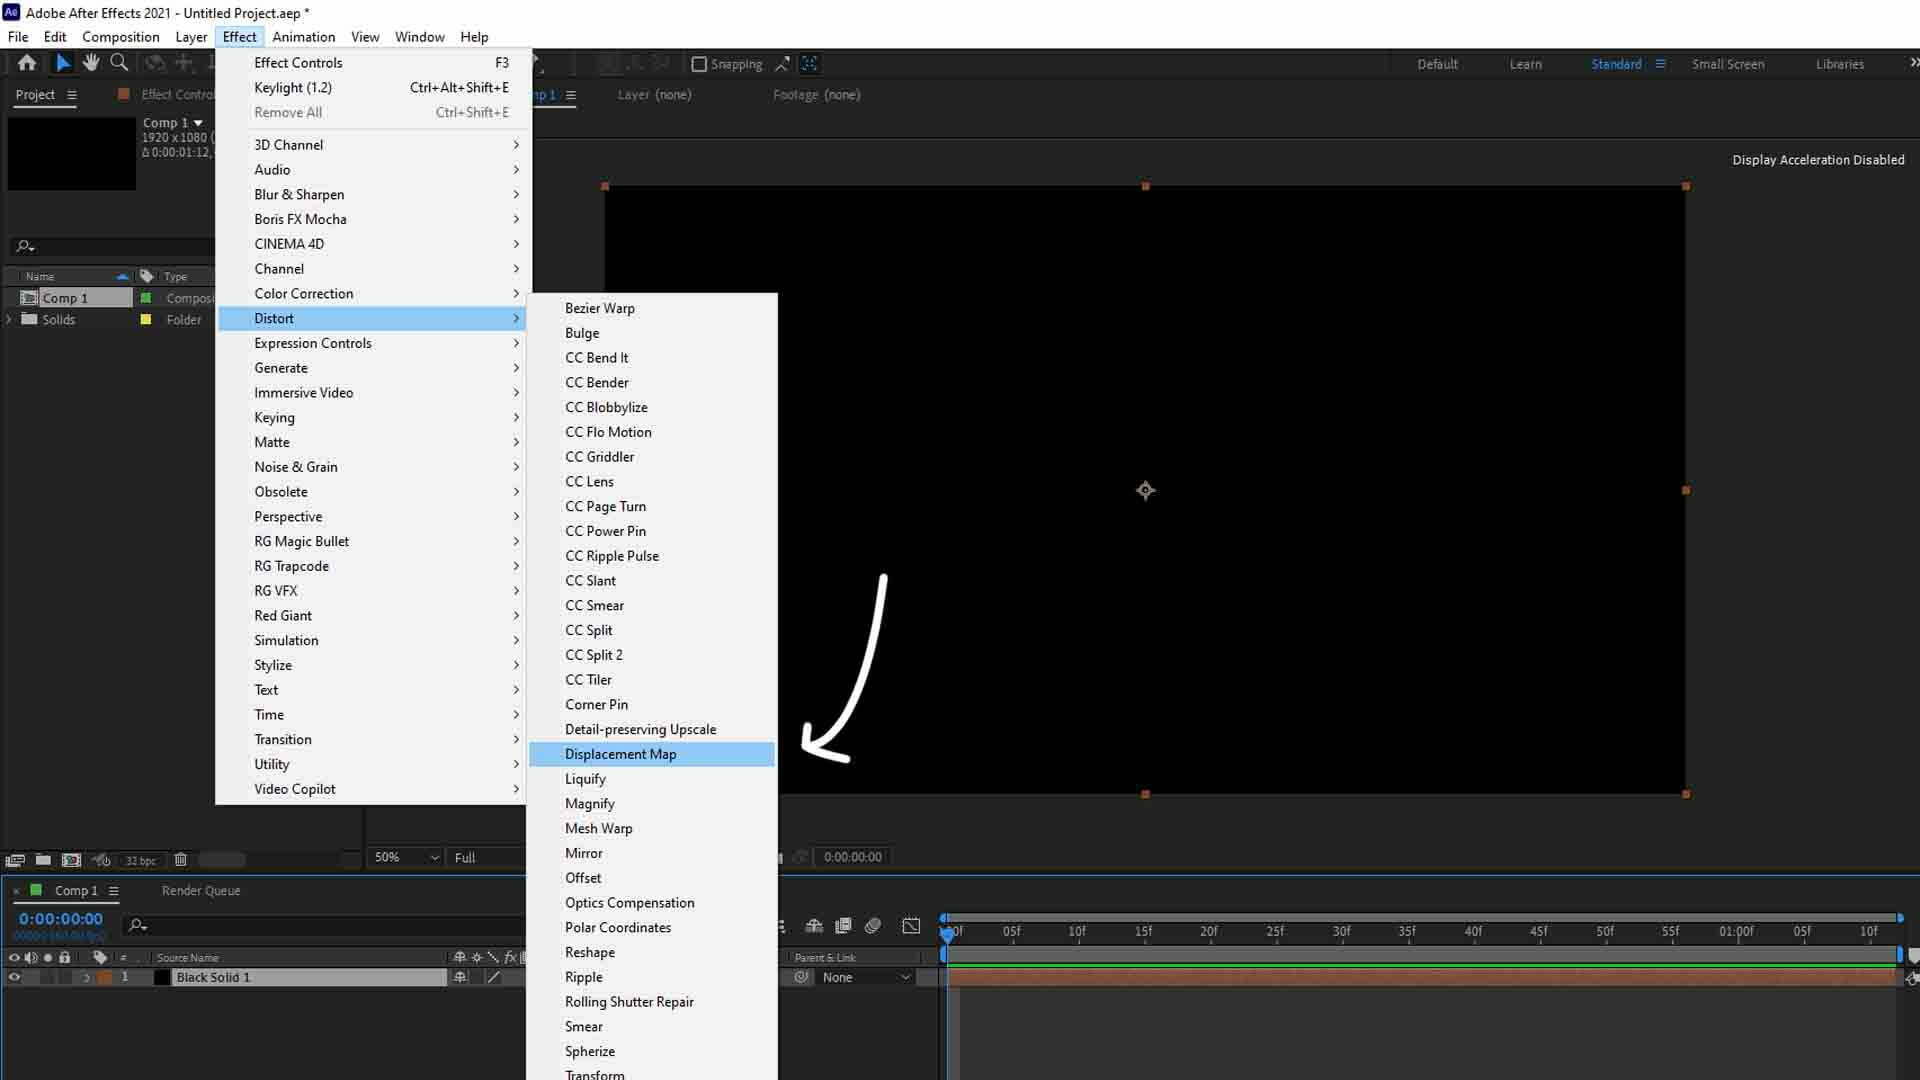 Displacement map features in Adobe after effects